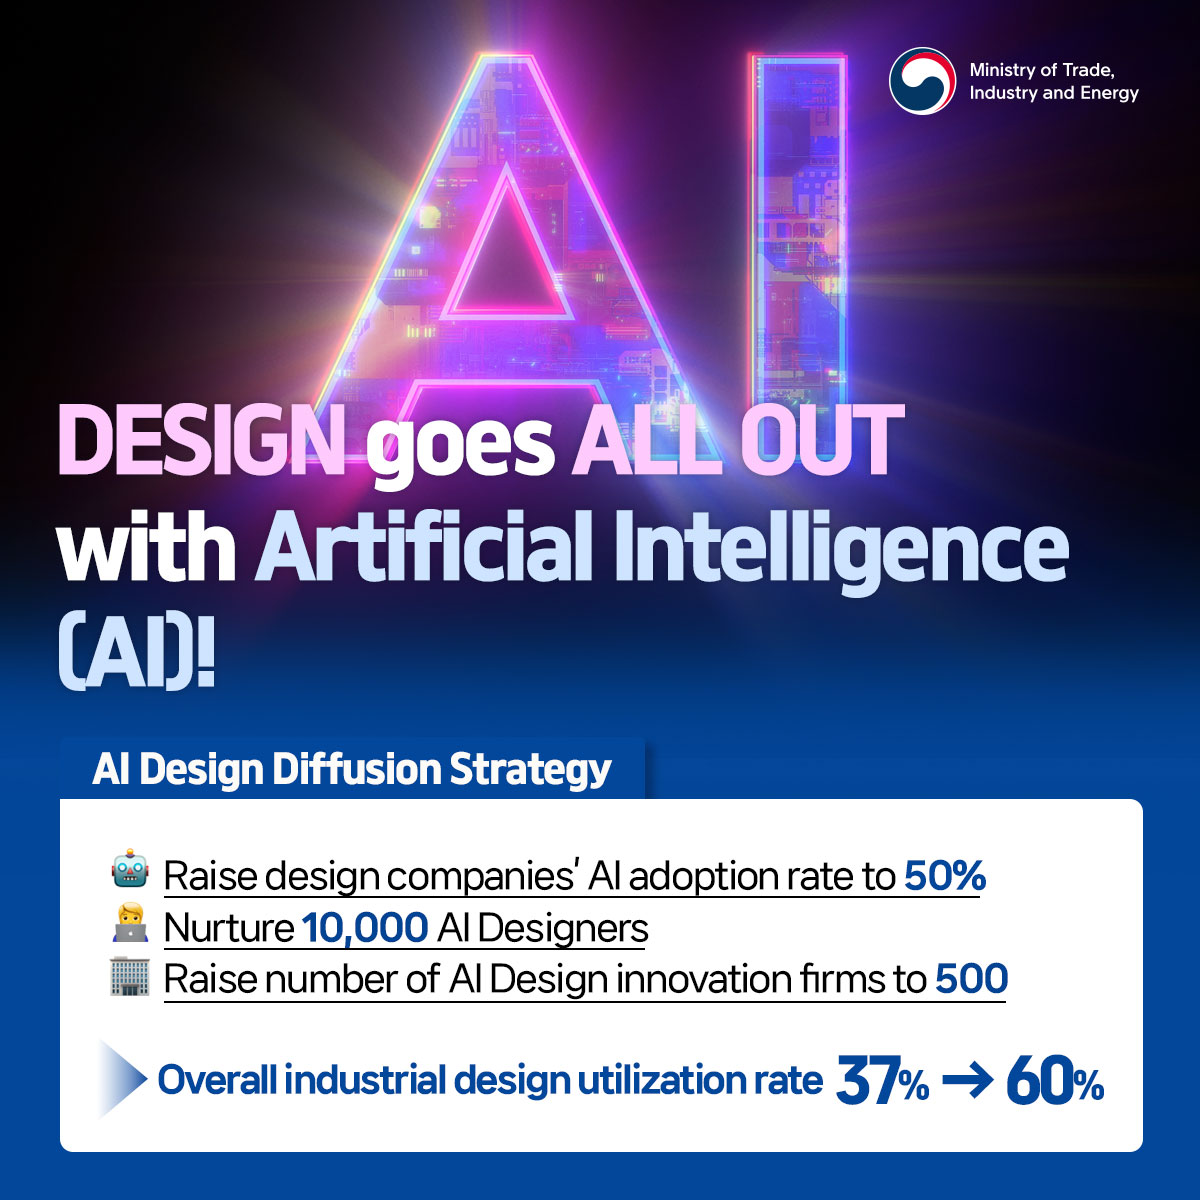 Design goes all out with AI!